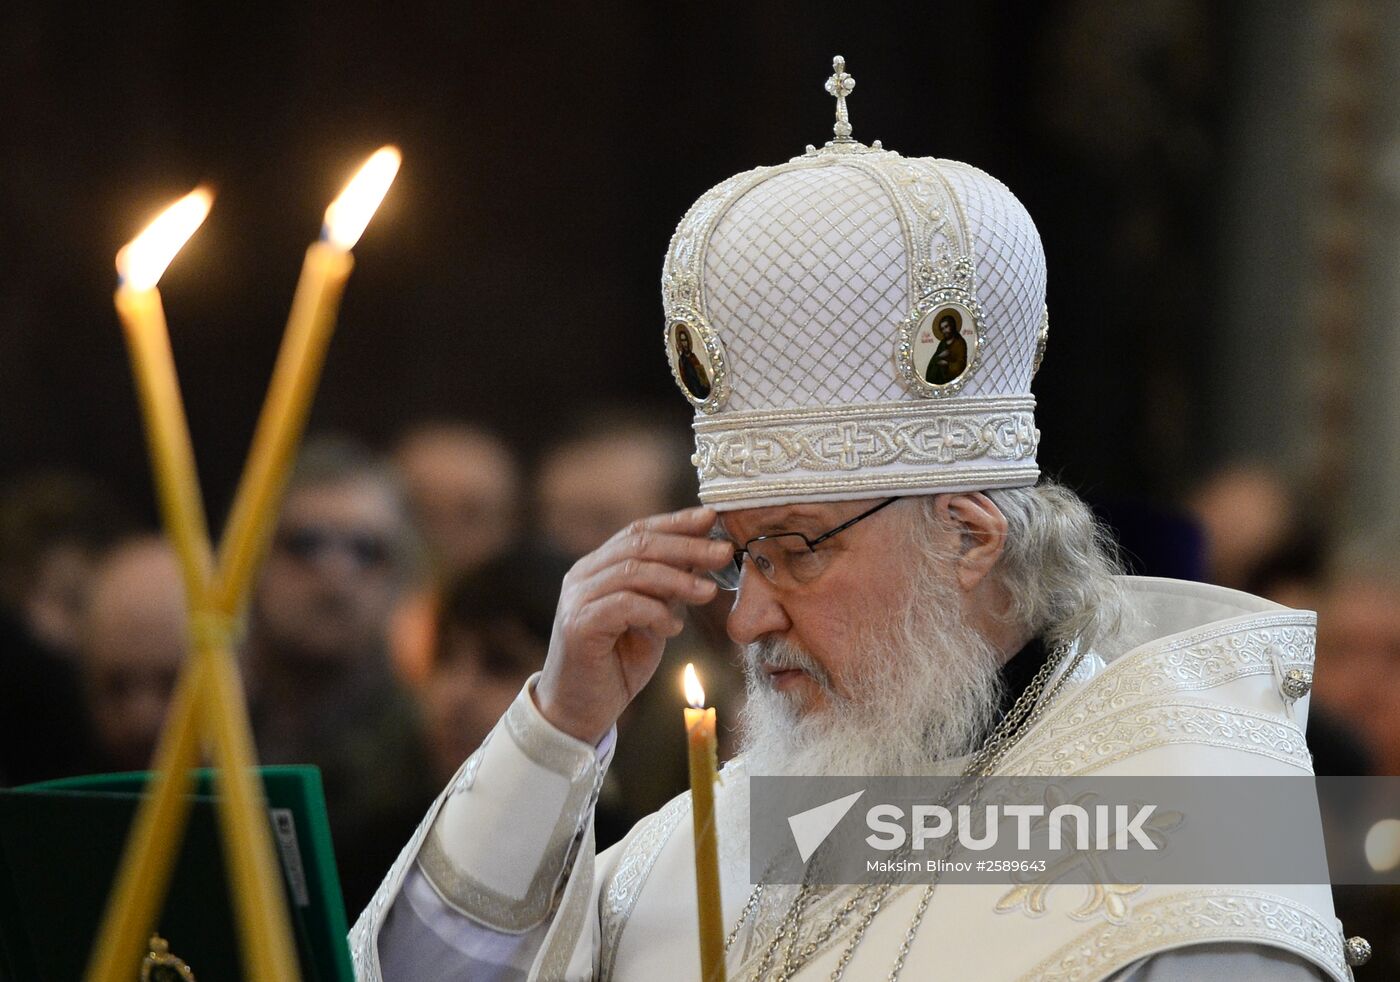 Funeral service for writer Valentin Rasputin at Cathedral of Christ the Savior